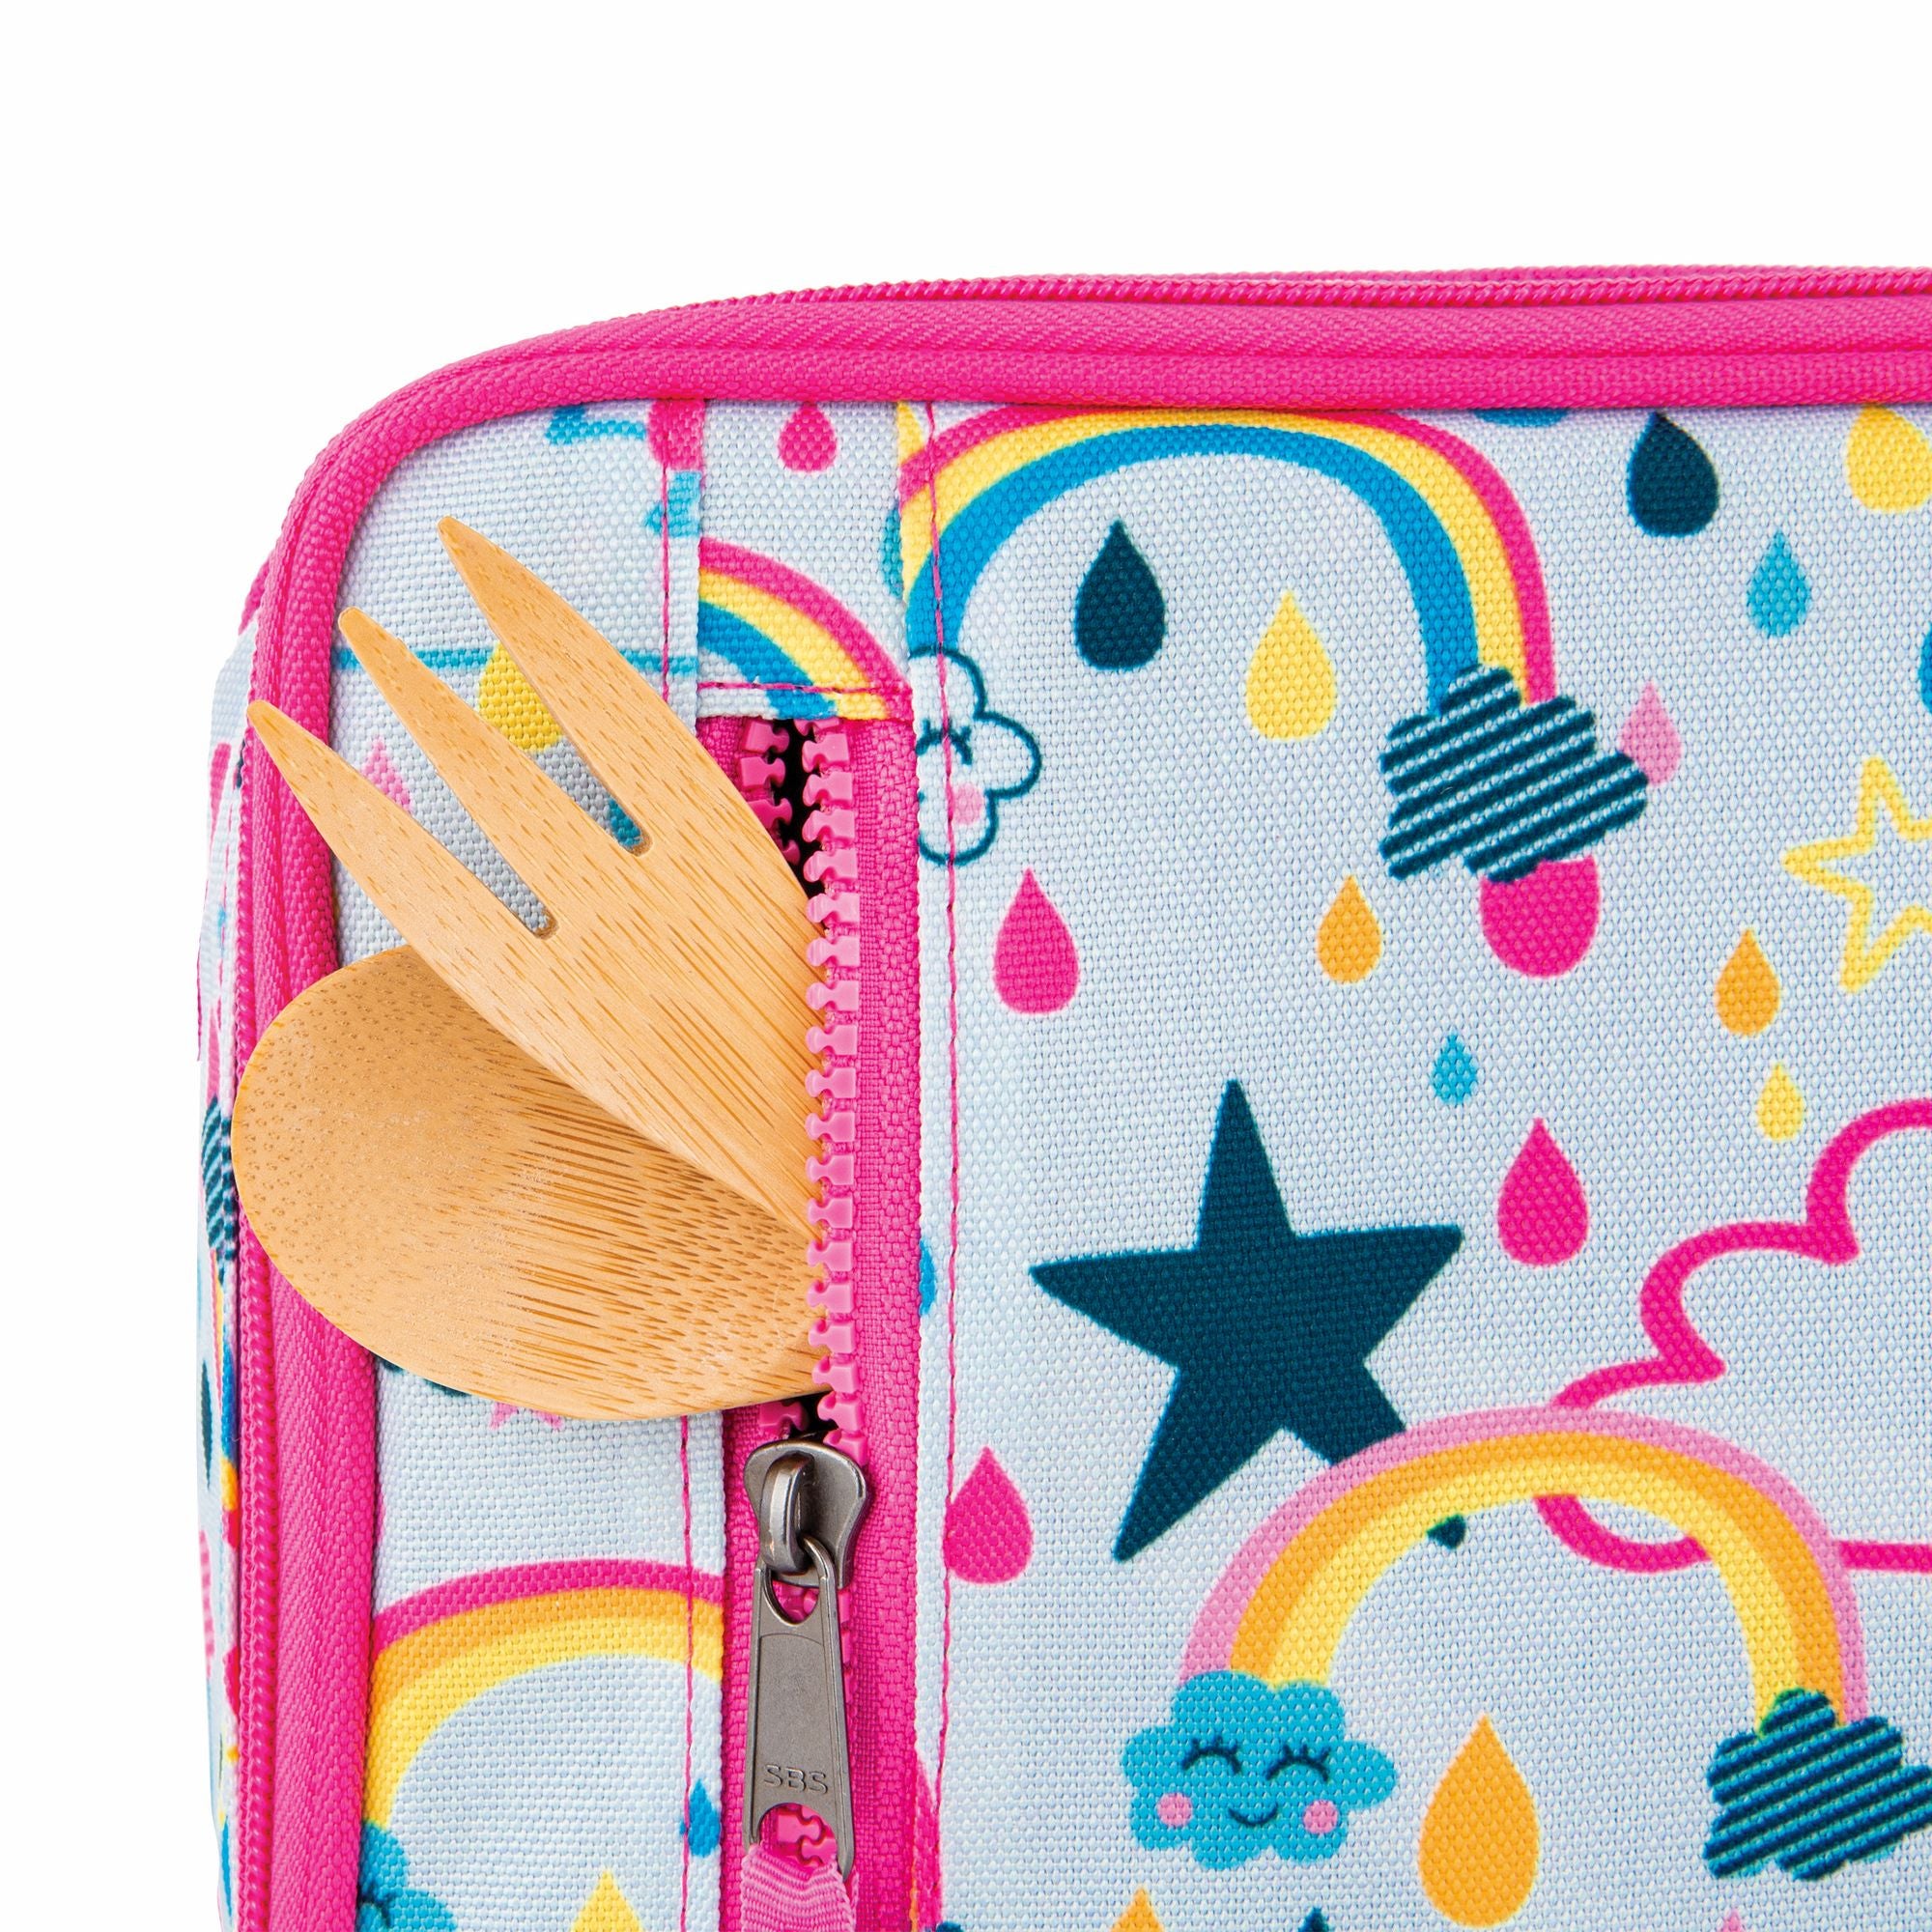 (SALE!) PackIt Freezable Classic Lunch Box